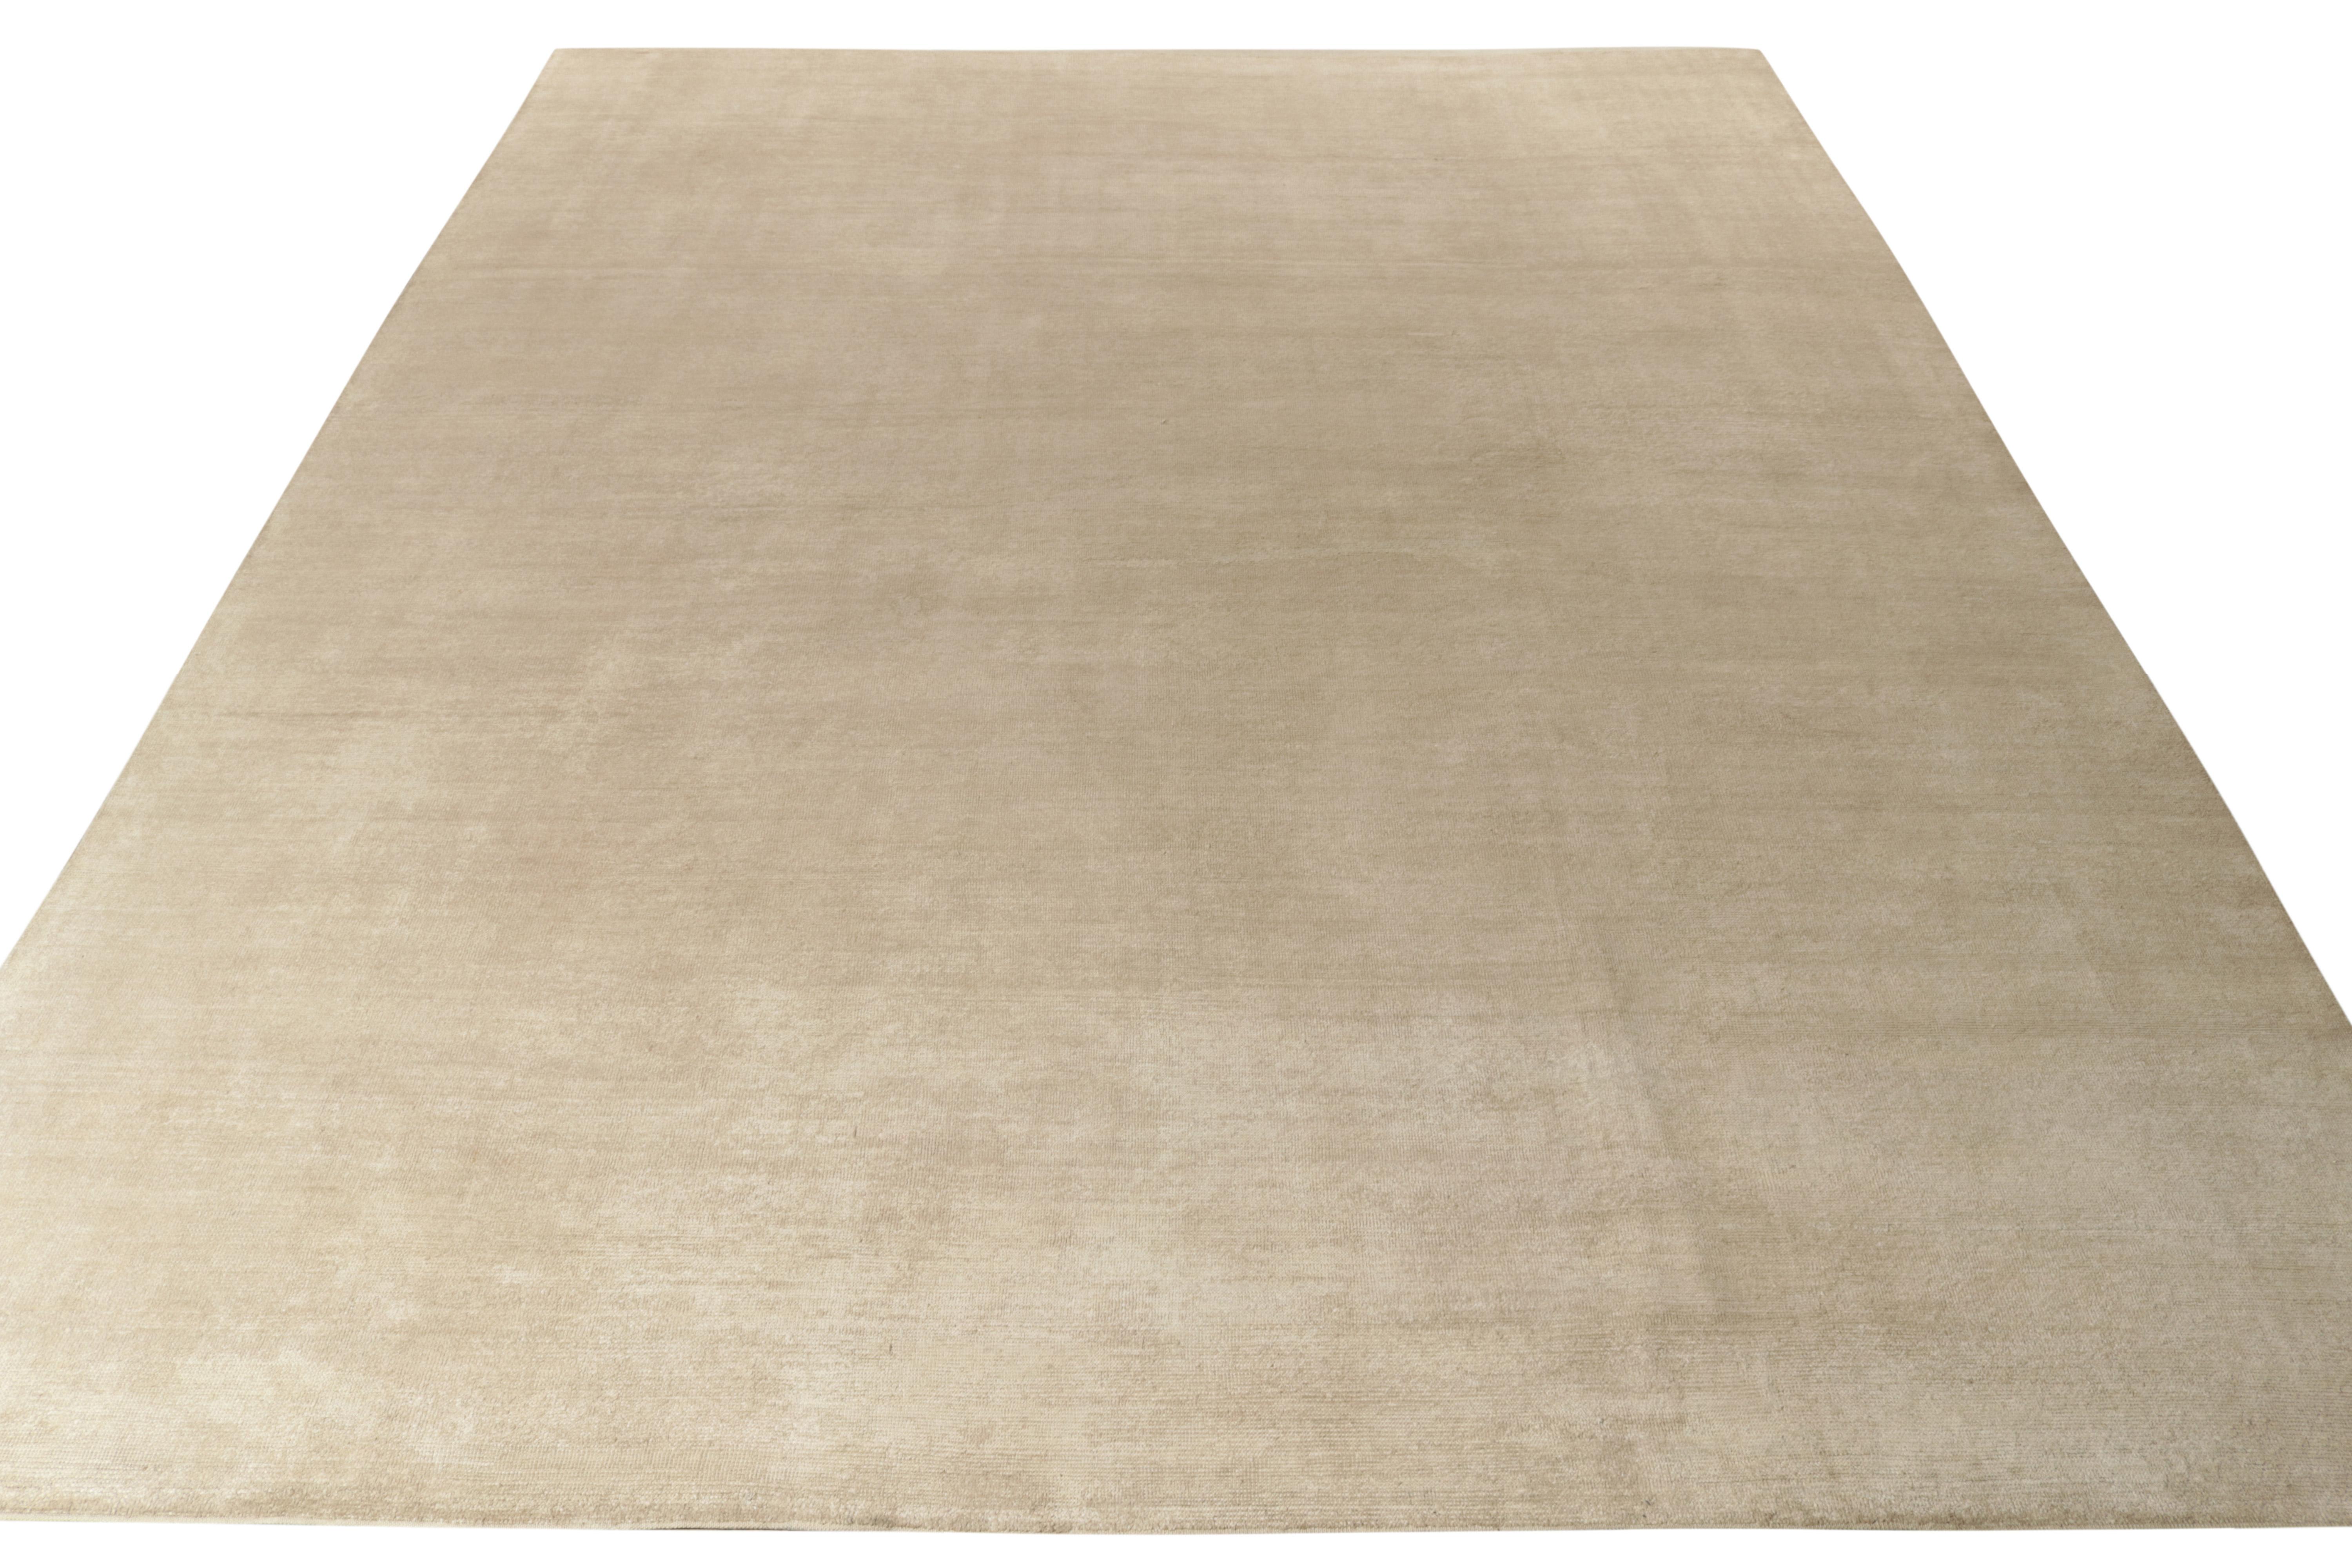 Joining Rug & Kilim’s Texture of Color collection, this 13x16 solid rug design is hand-knotted in a gracious size, enjoying a smart, abrashed look exemplifying this line. This custom rug design draws finesse from the marriage of luscious beige cream